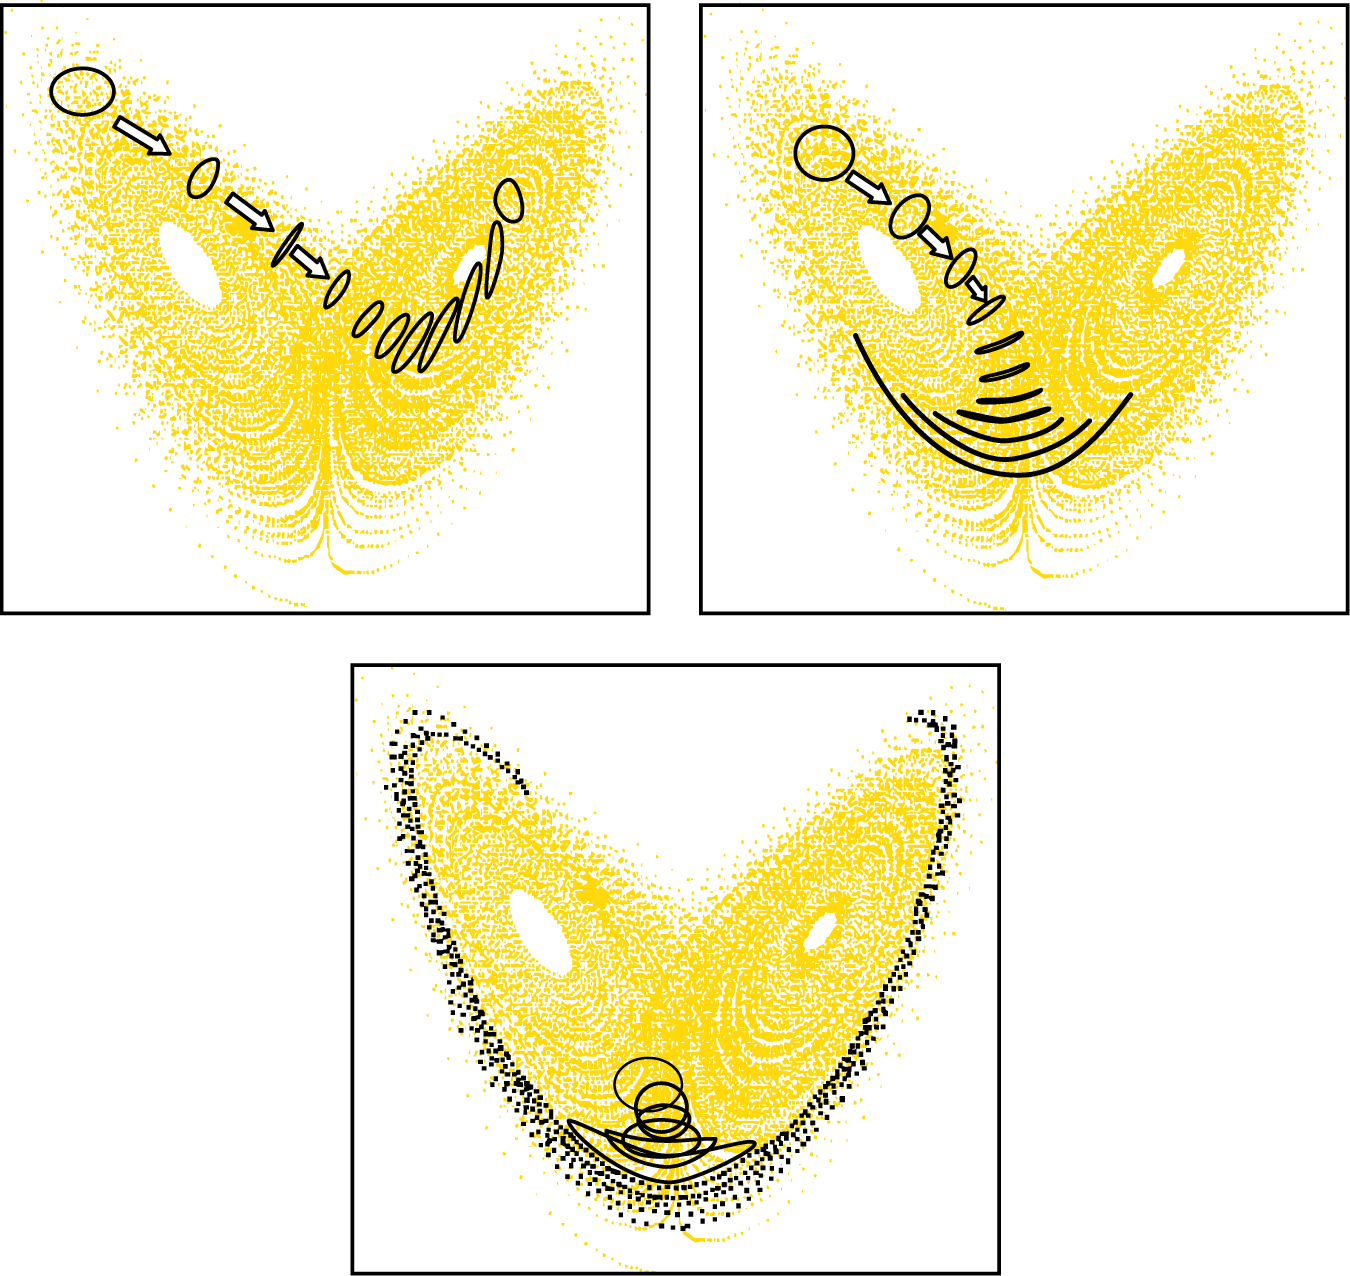 Ensemble forecasts in the Lorenz attractor.